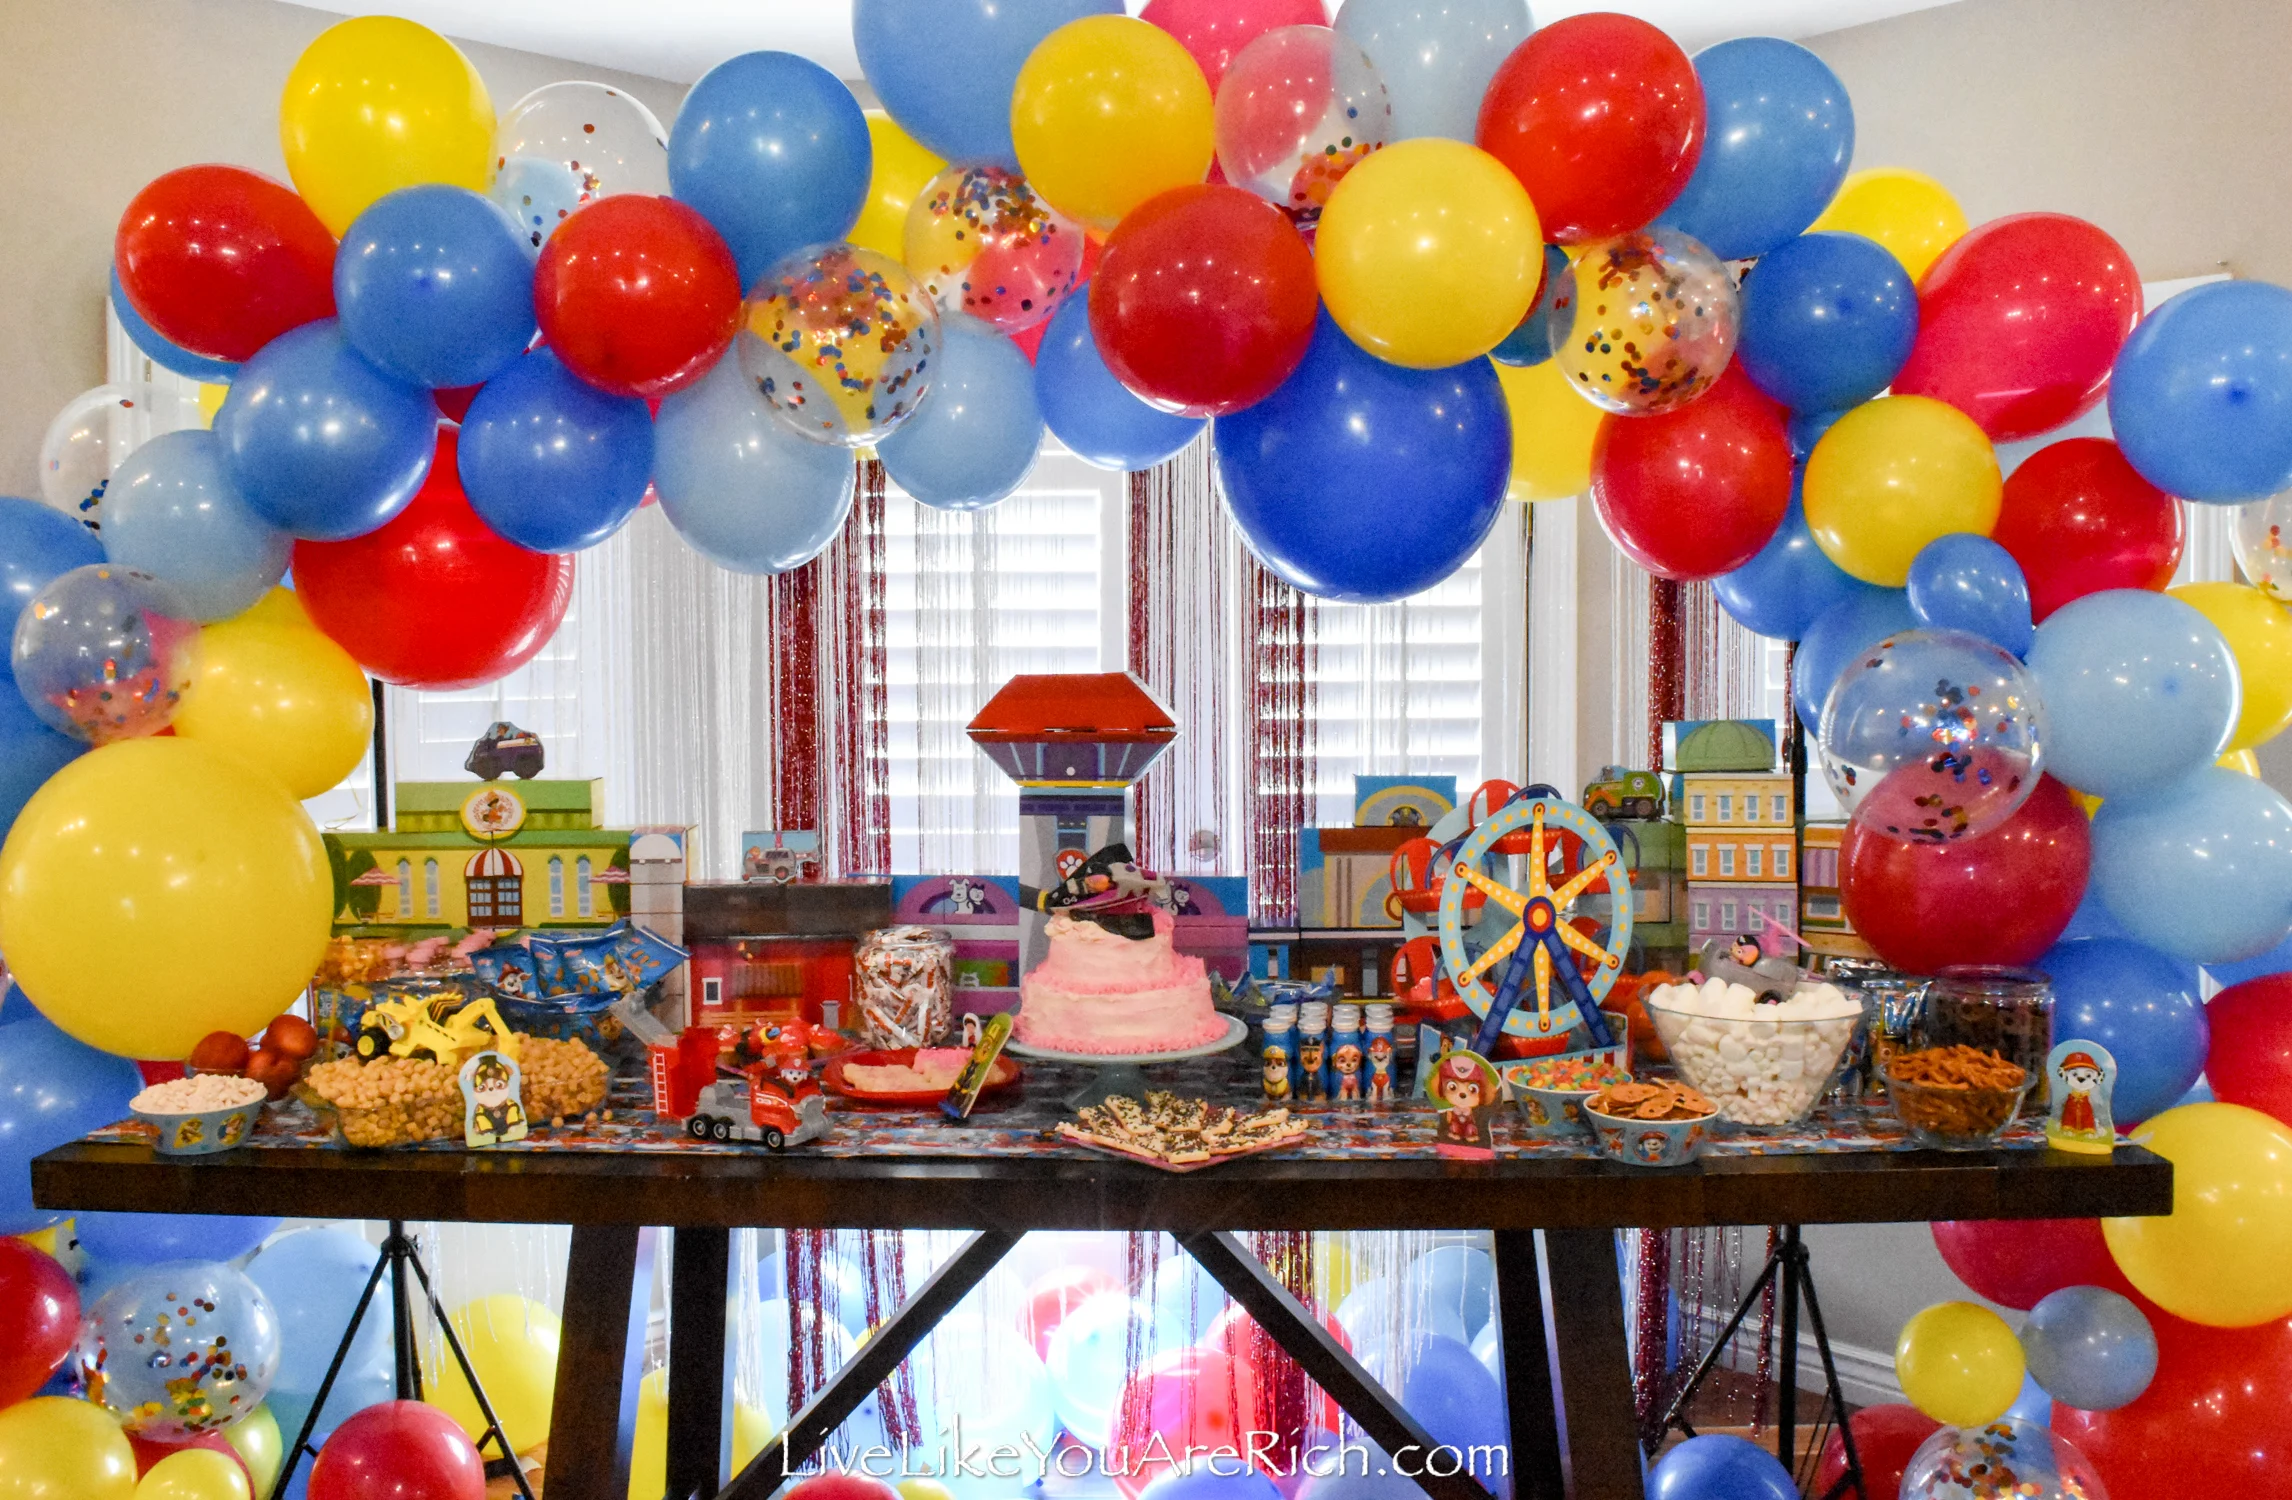 Paw Patrol Birthday Party Decorations And Food Live Like You Are Rich